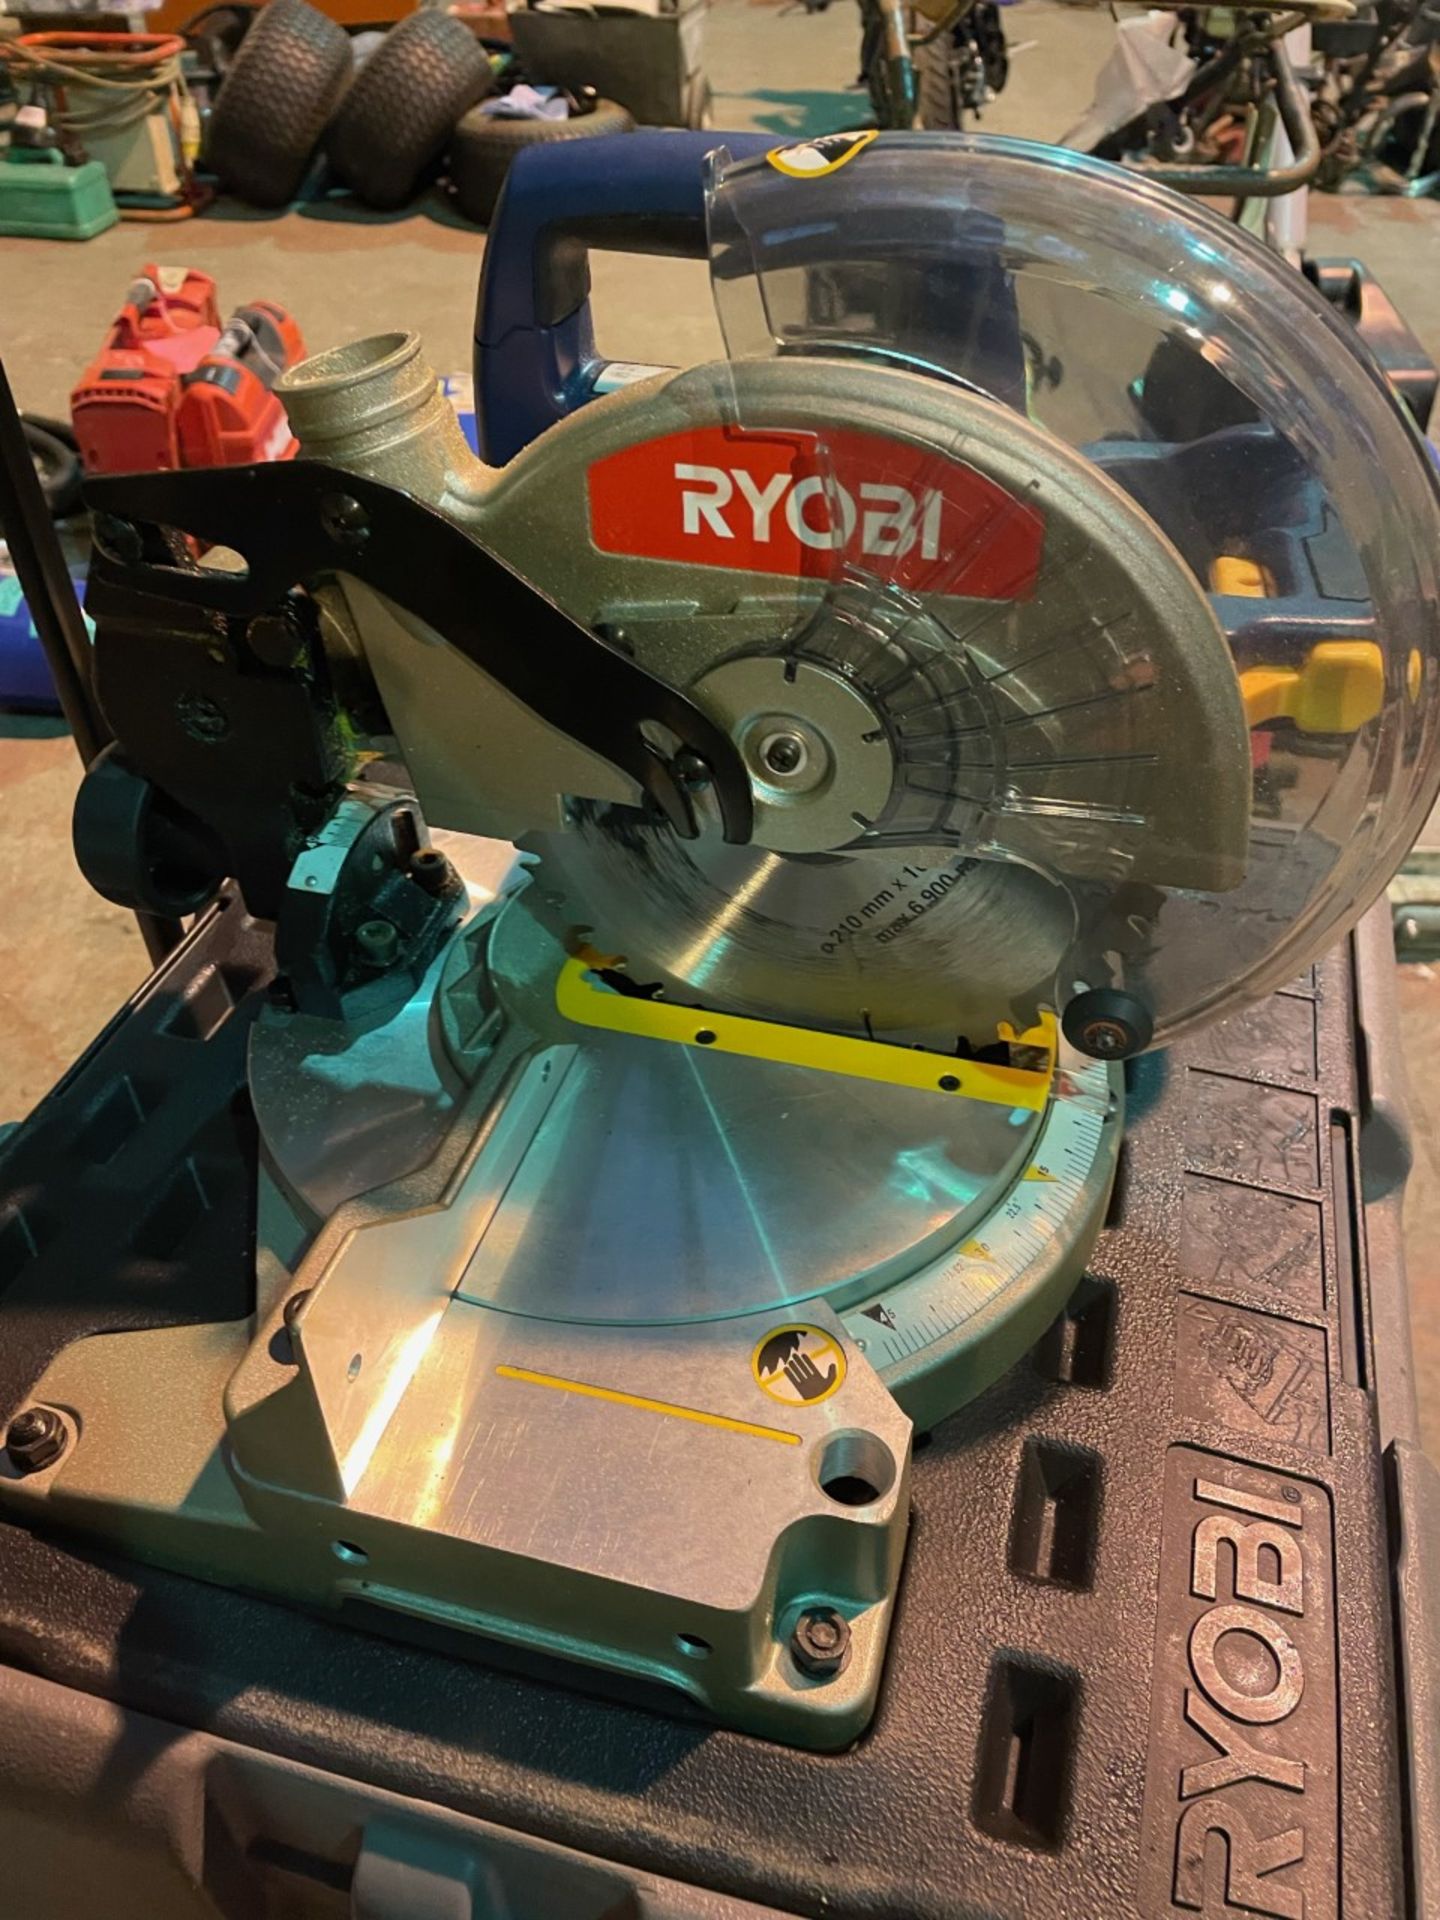 Ryobi 18v mitre saw on portable workstation. No batteries included. Saw is nearly new. - Image 3 of 3